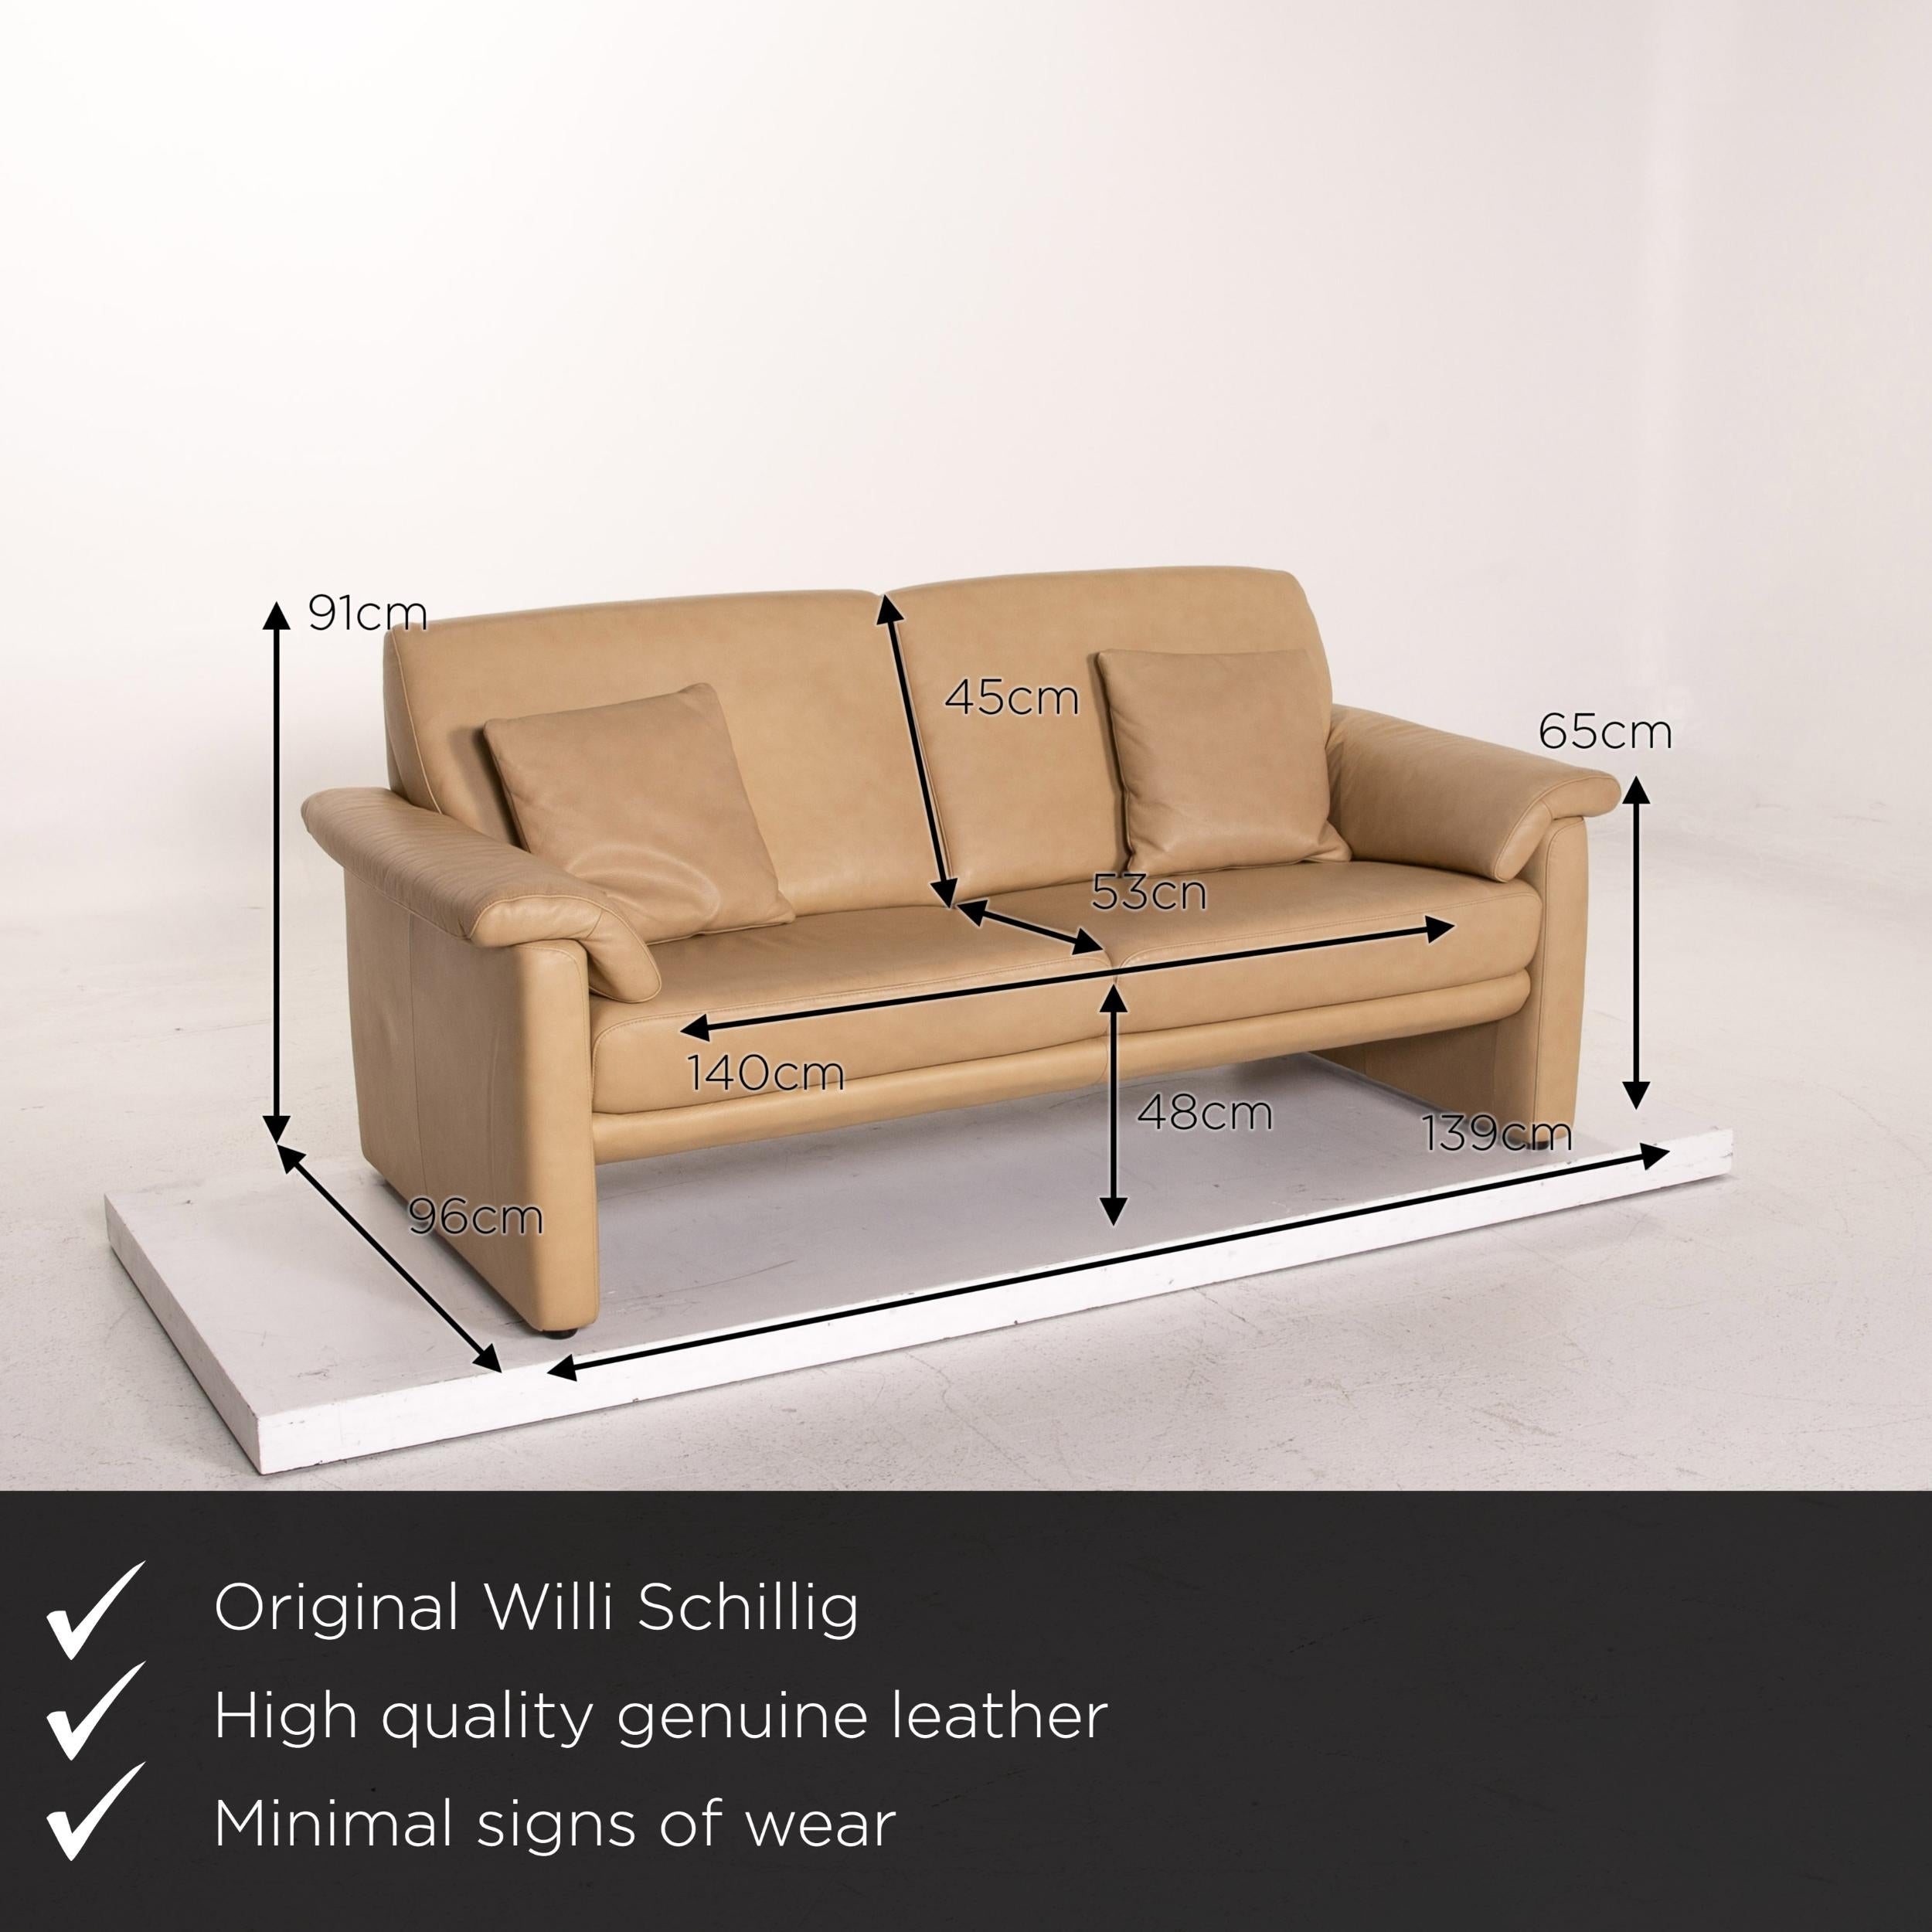 We present to you a Willi Schillig Lucca leather sofa set beige 1x two-seater 1x armchair.
 

 Product measurements in centimeters:
 

Depth: 96
Width: 139
Height: 91
Seat height: 48
Rest height: 65
Seat depth: 53
Seat width: 140
Back